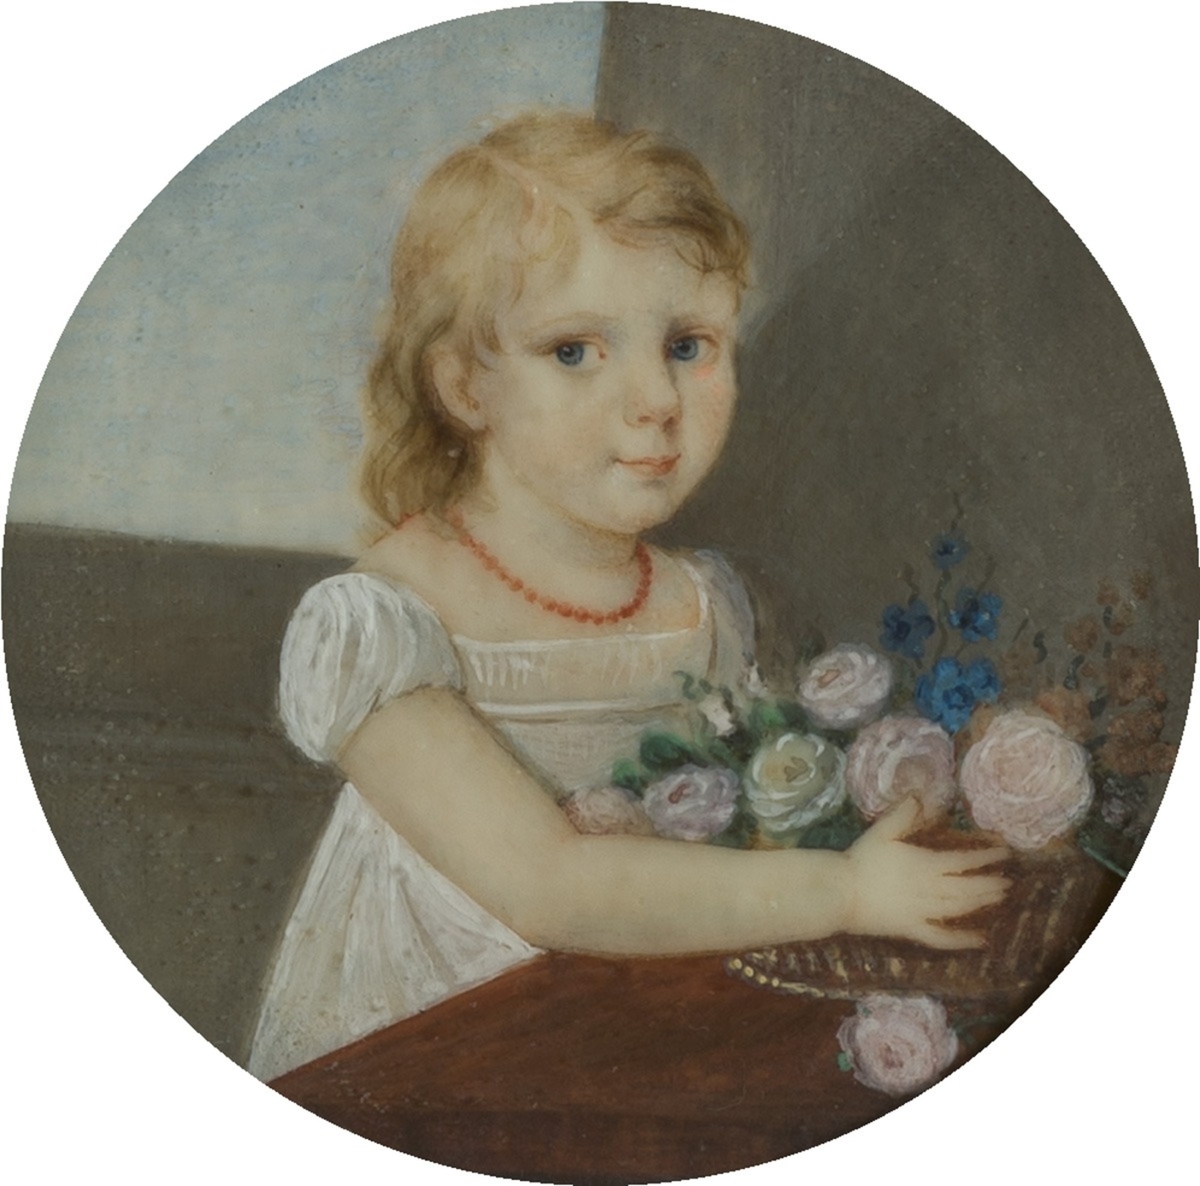 Allegra, Daughter of Lord Byron (1817–1822)